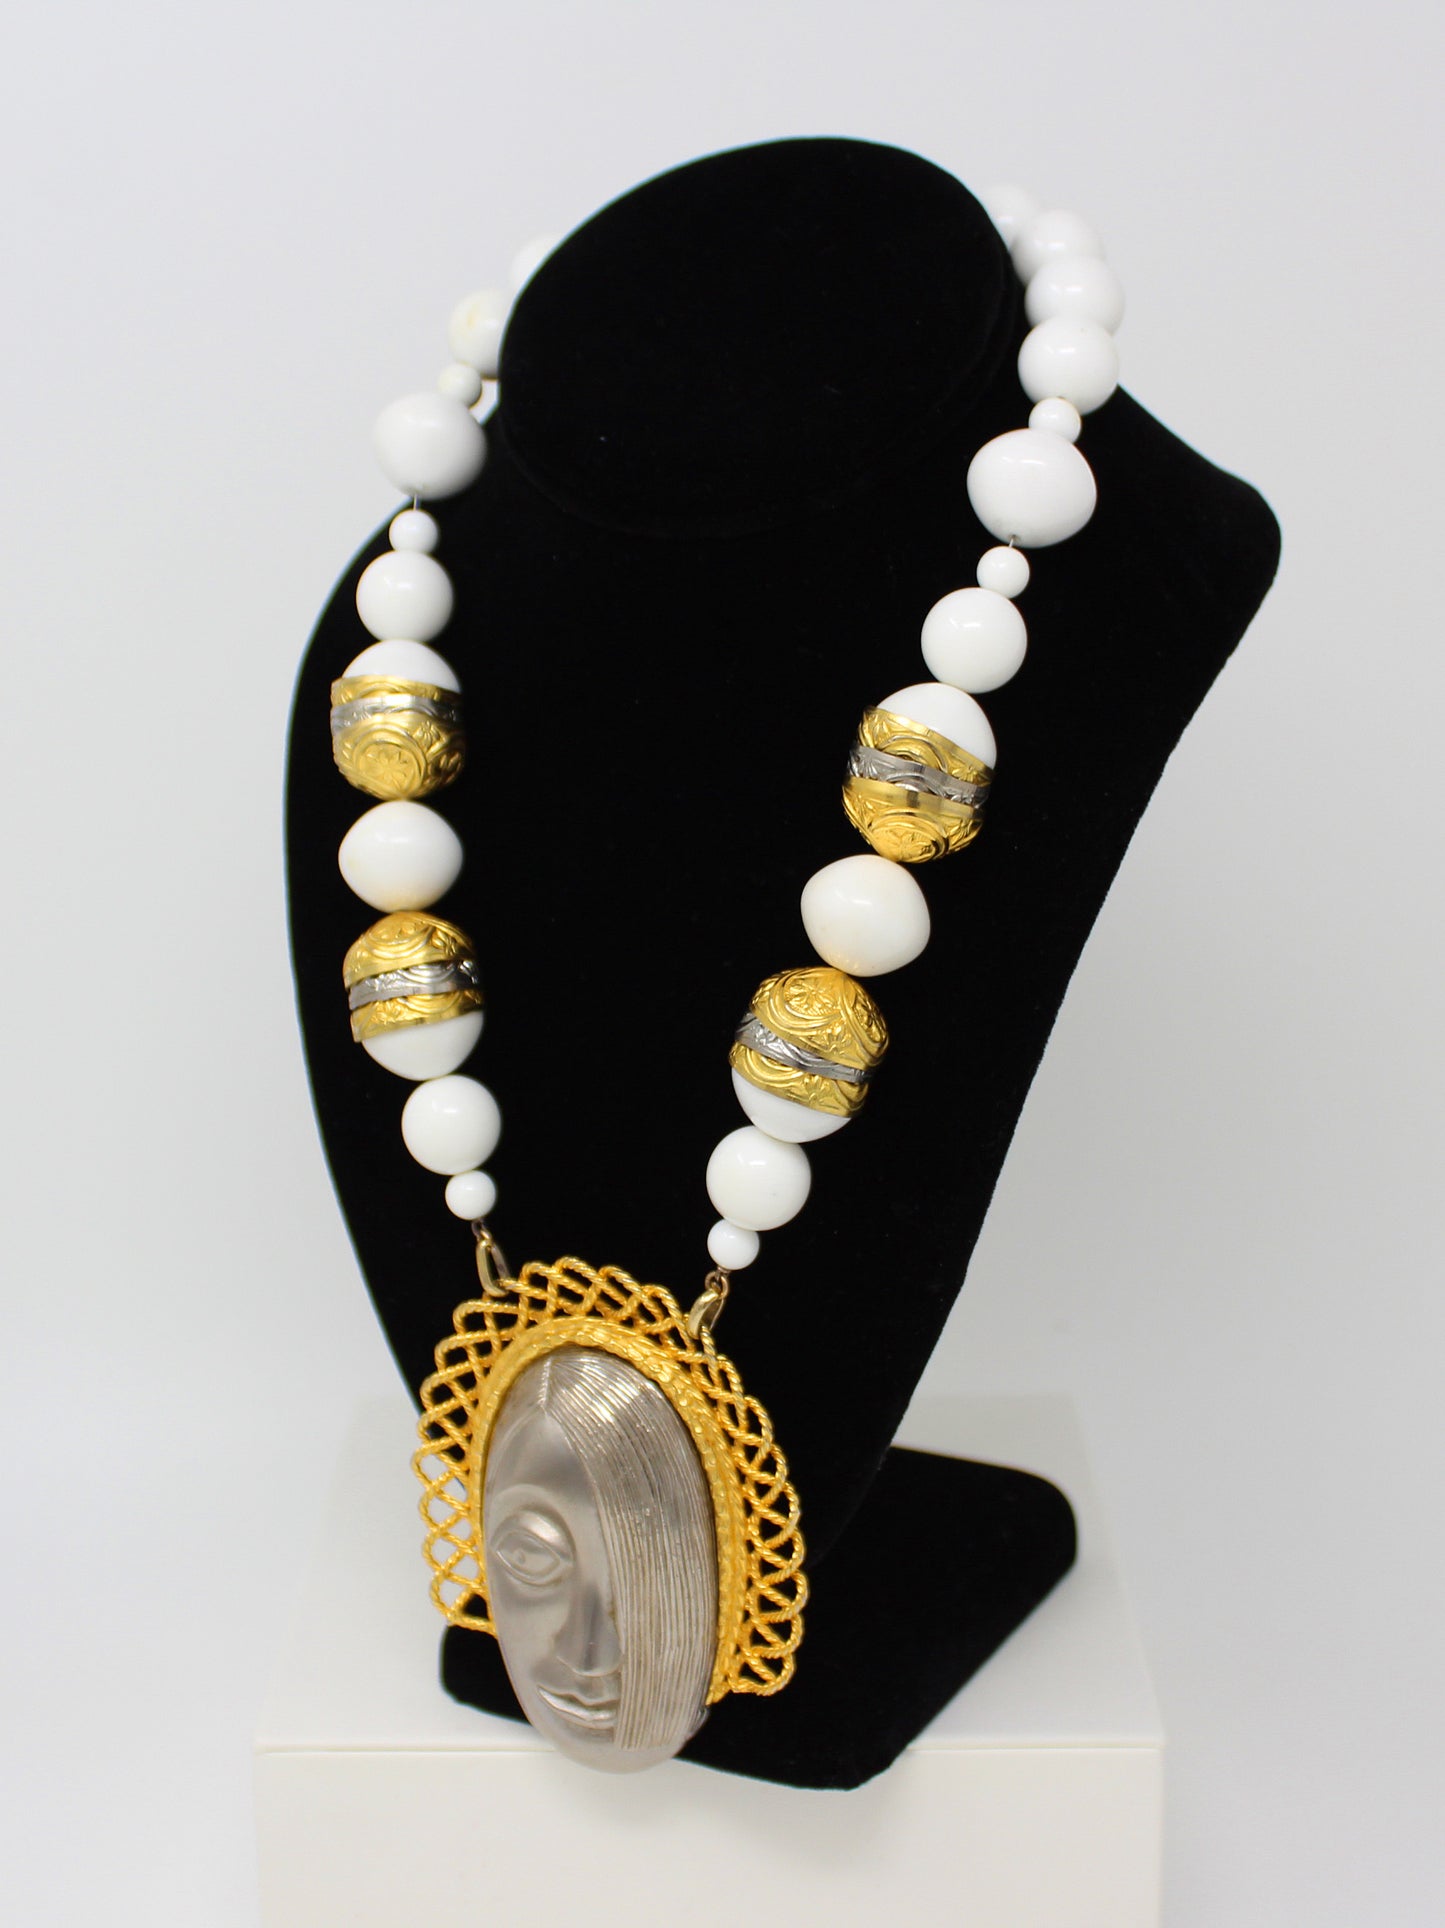 Vintage Deco Style Face Pendant Necklace with Large White Plastic Beads and Decorative Gold and Silver Tone Bead Caps